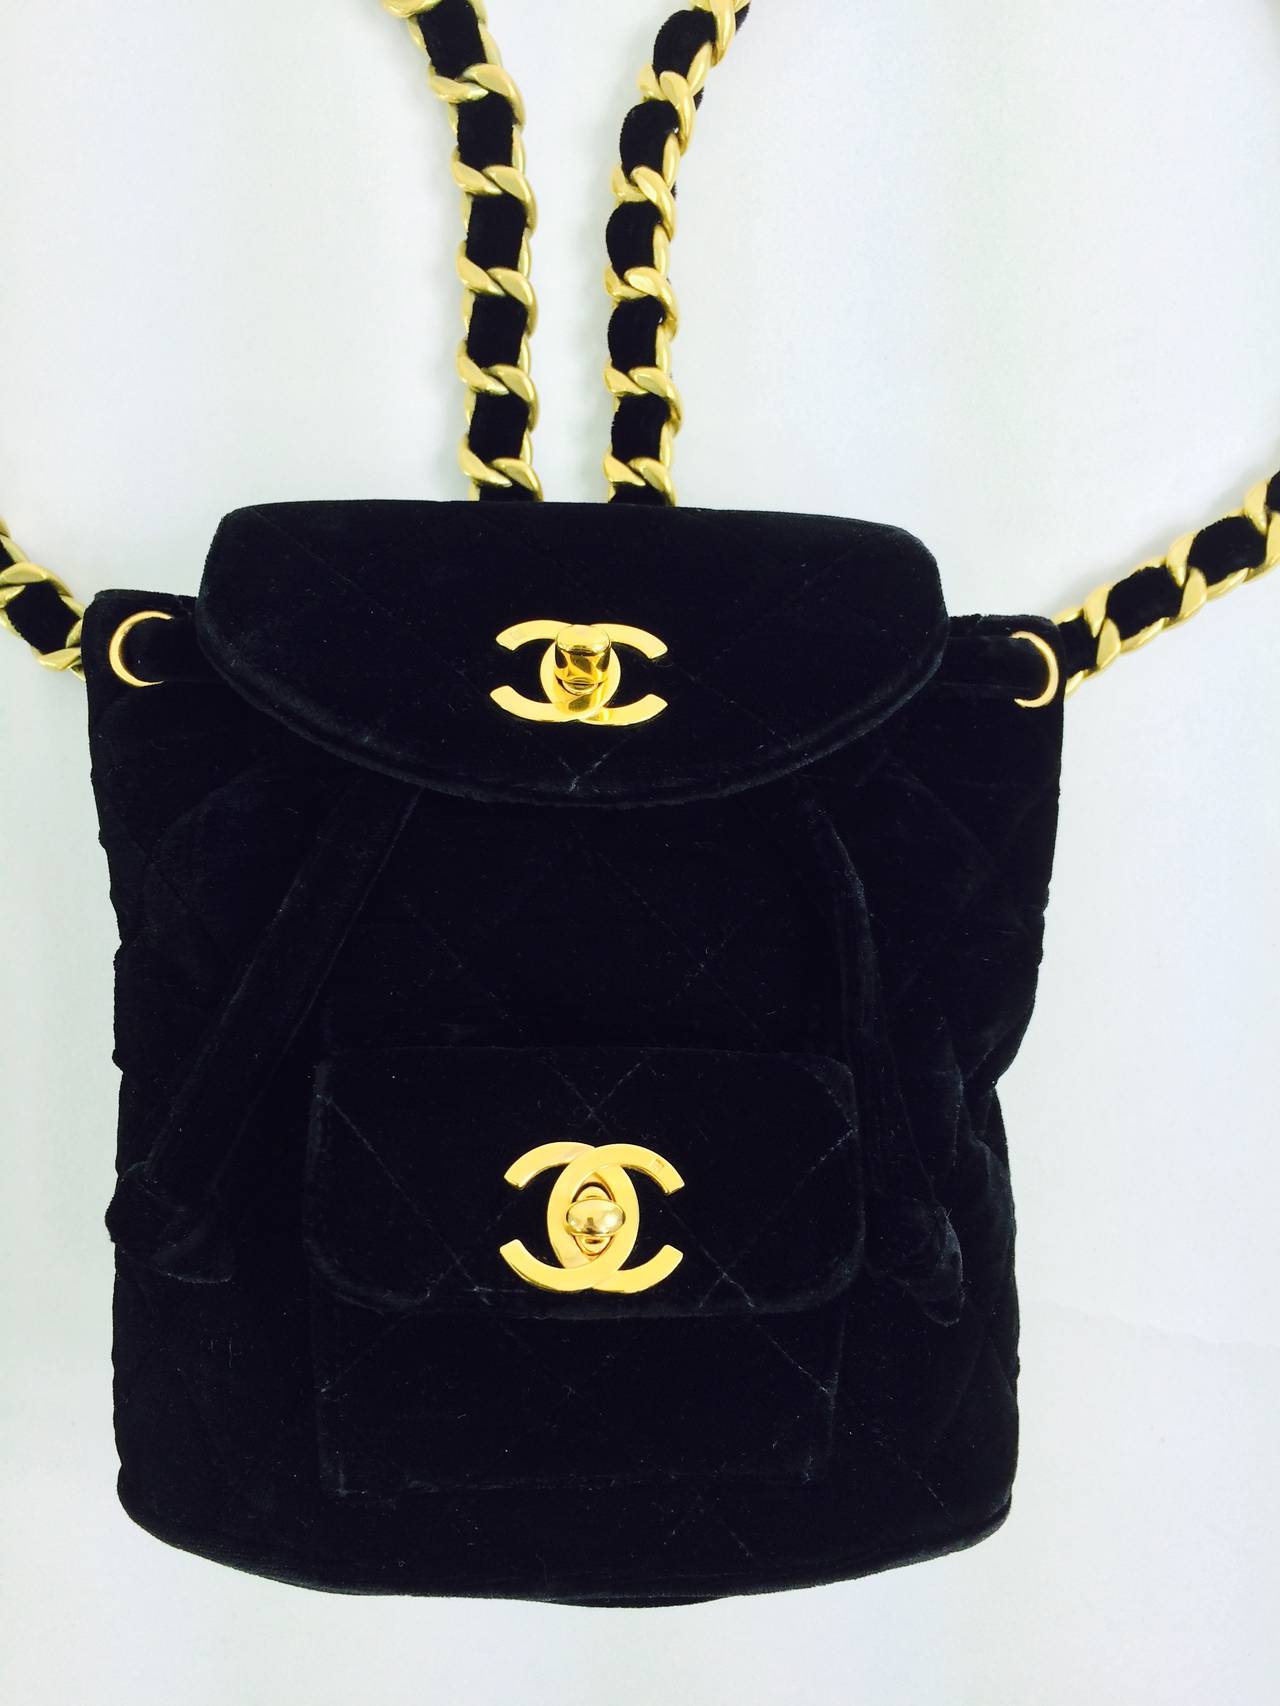 Chanel quilted black velvet, leather lined mini back pack 1996...Double shoulder straps have gold chain and adjustable buckles...Double flap fronts, the upper flap opens to the main compartment which is lined in black leather...The lower outside